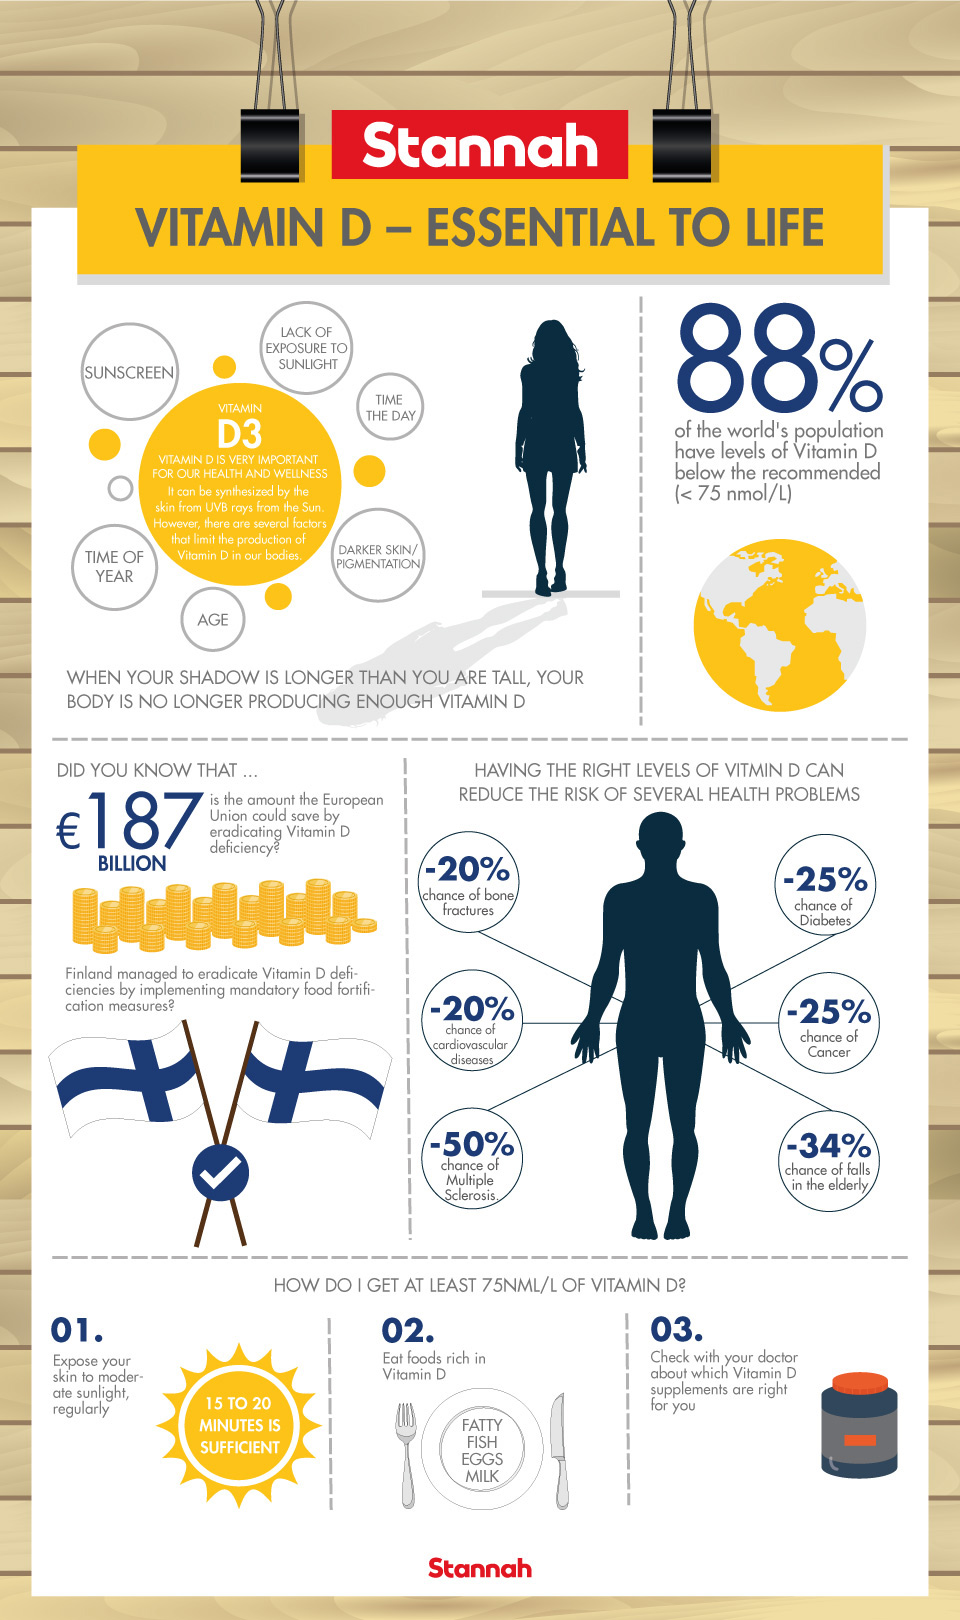 An infographic about Vitamin D